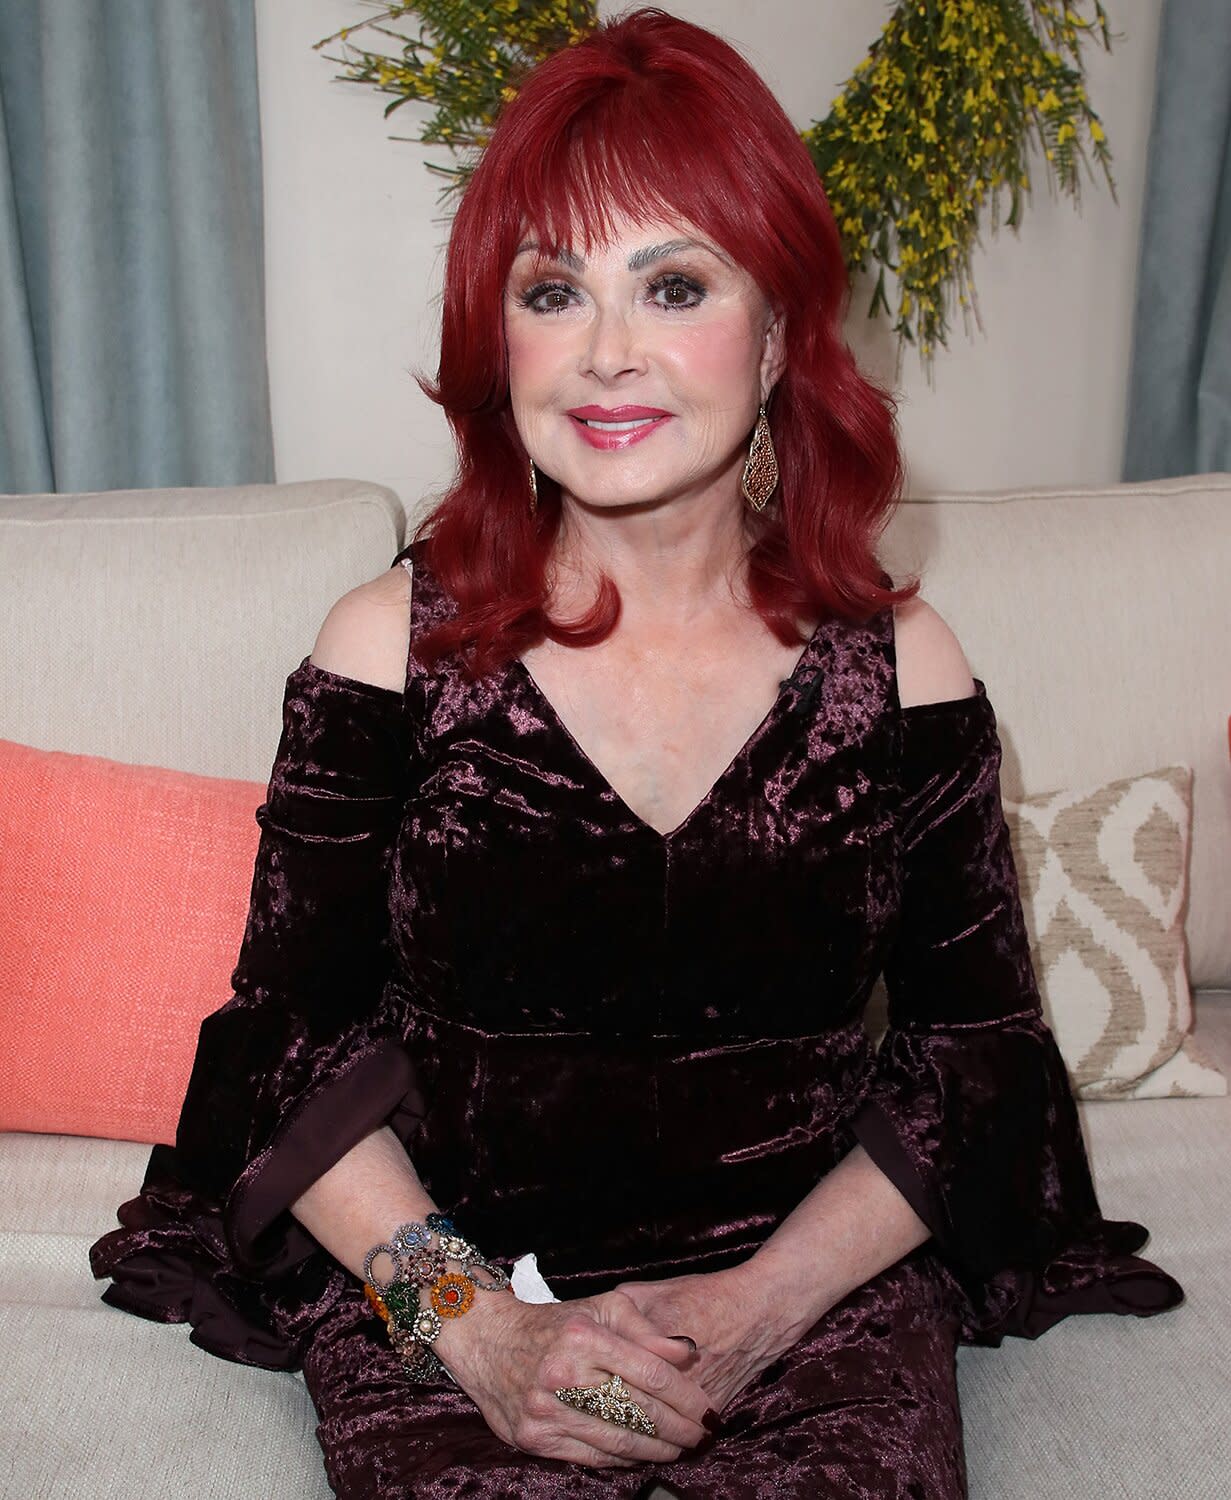 Singer Naomi Judd visits Hallmark's "Home &amp; Family" at Universal Studios Hollywood on March 30, 2018 in Universal City, California.